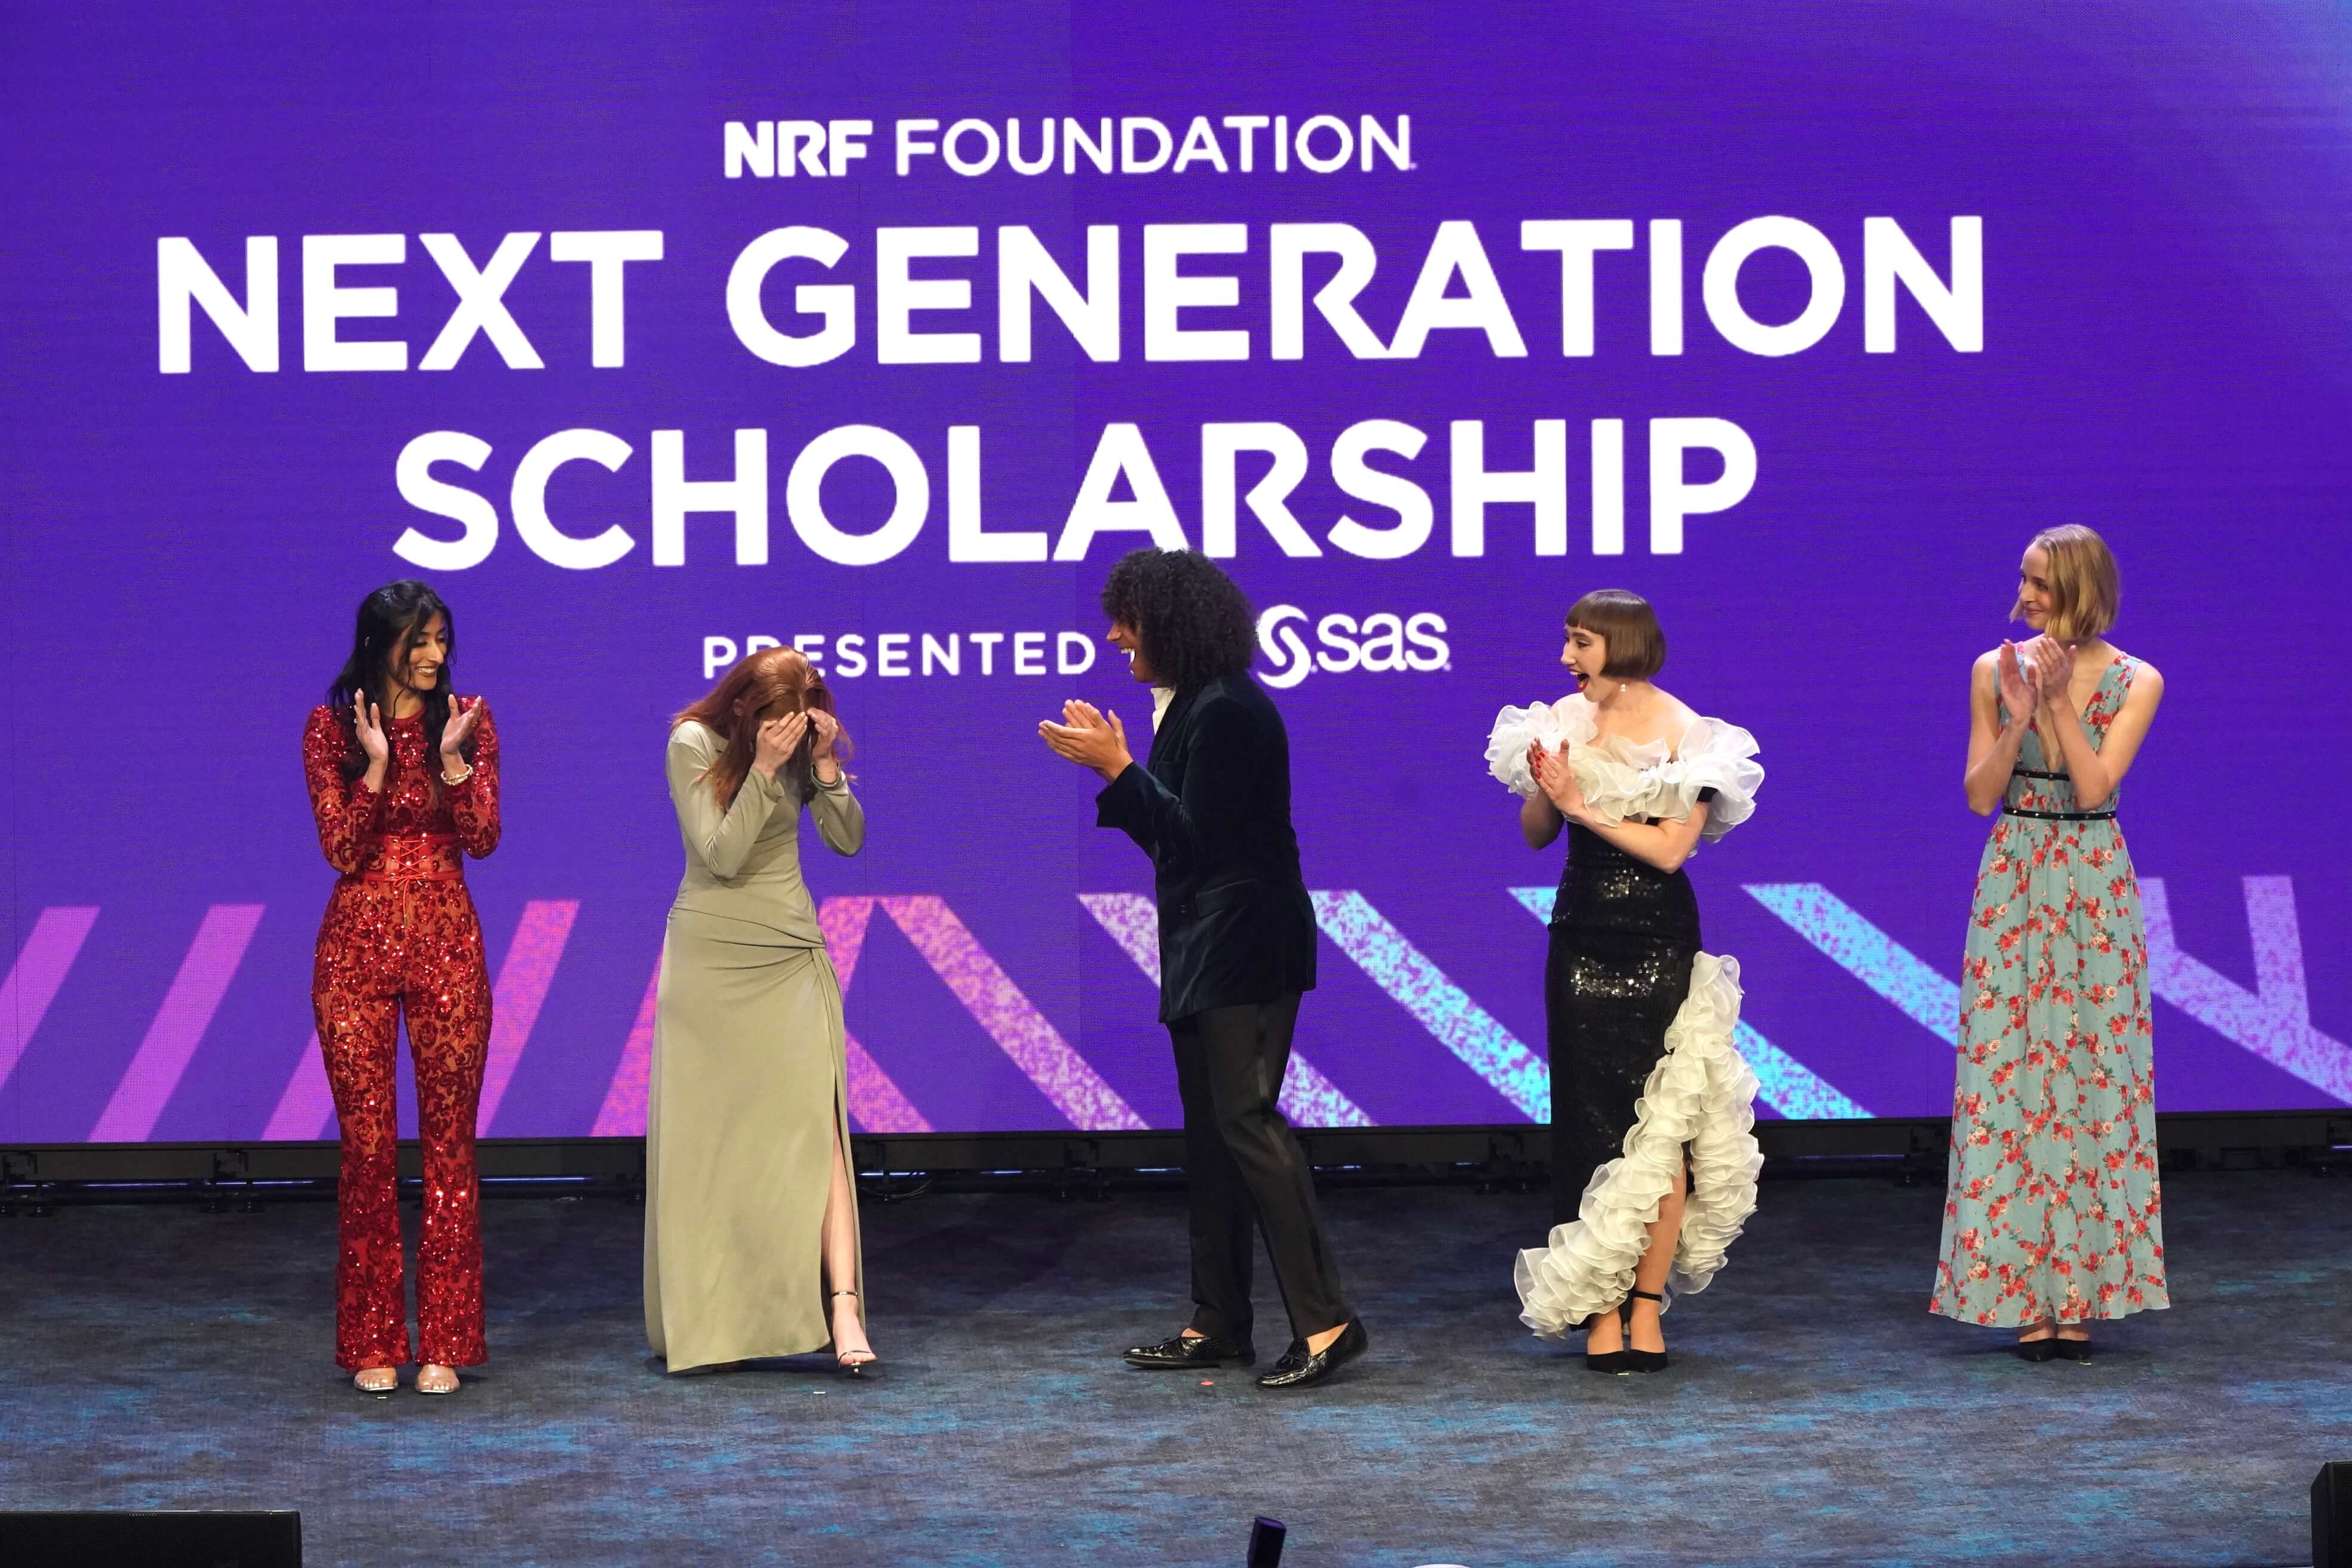 Megan Marr wins 2022/2023 NRF competition, five students onstage